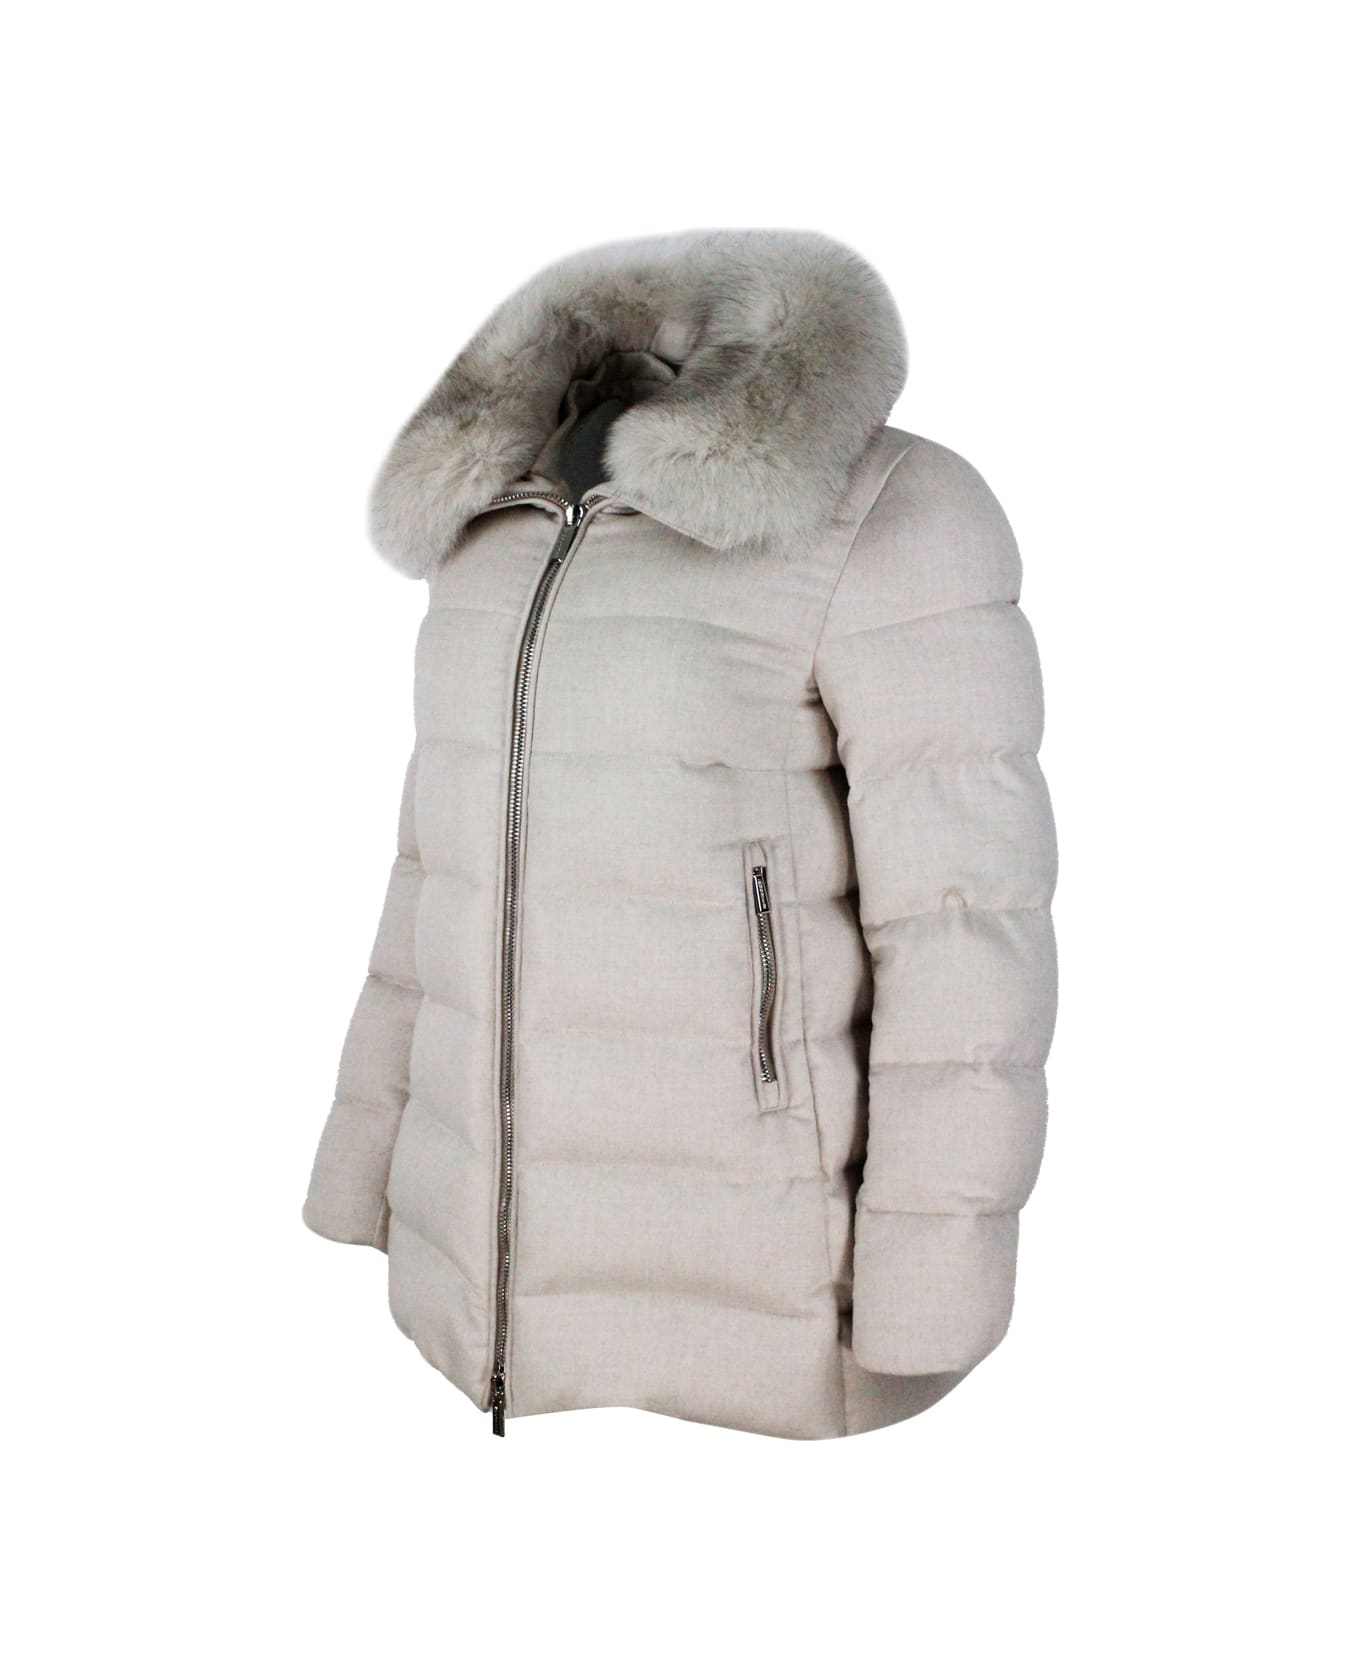 Moorer Coat Made In Fine Cashmere Blend Flannel Padded With Goose Down. Collar Trimmed With Detachable Fox Fur. - Almond